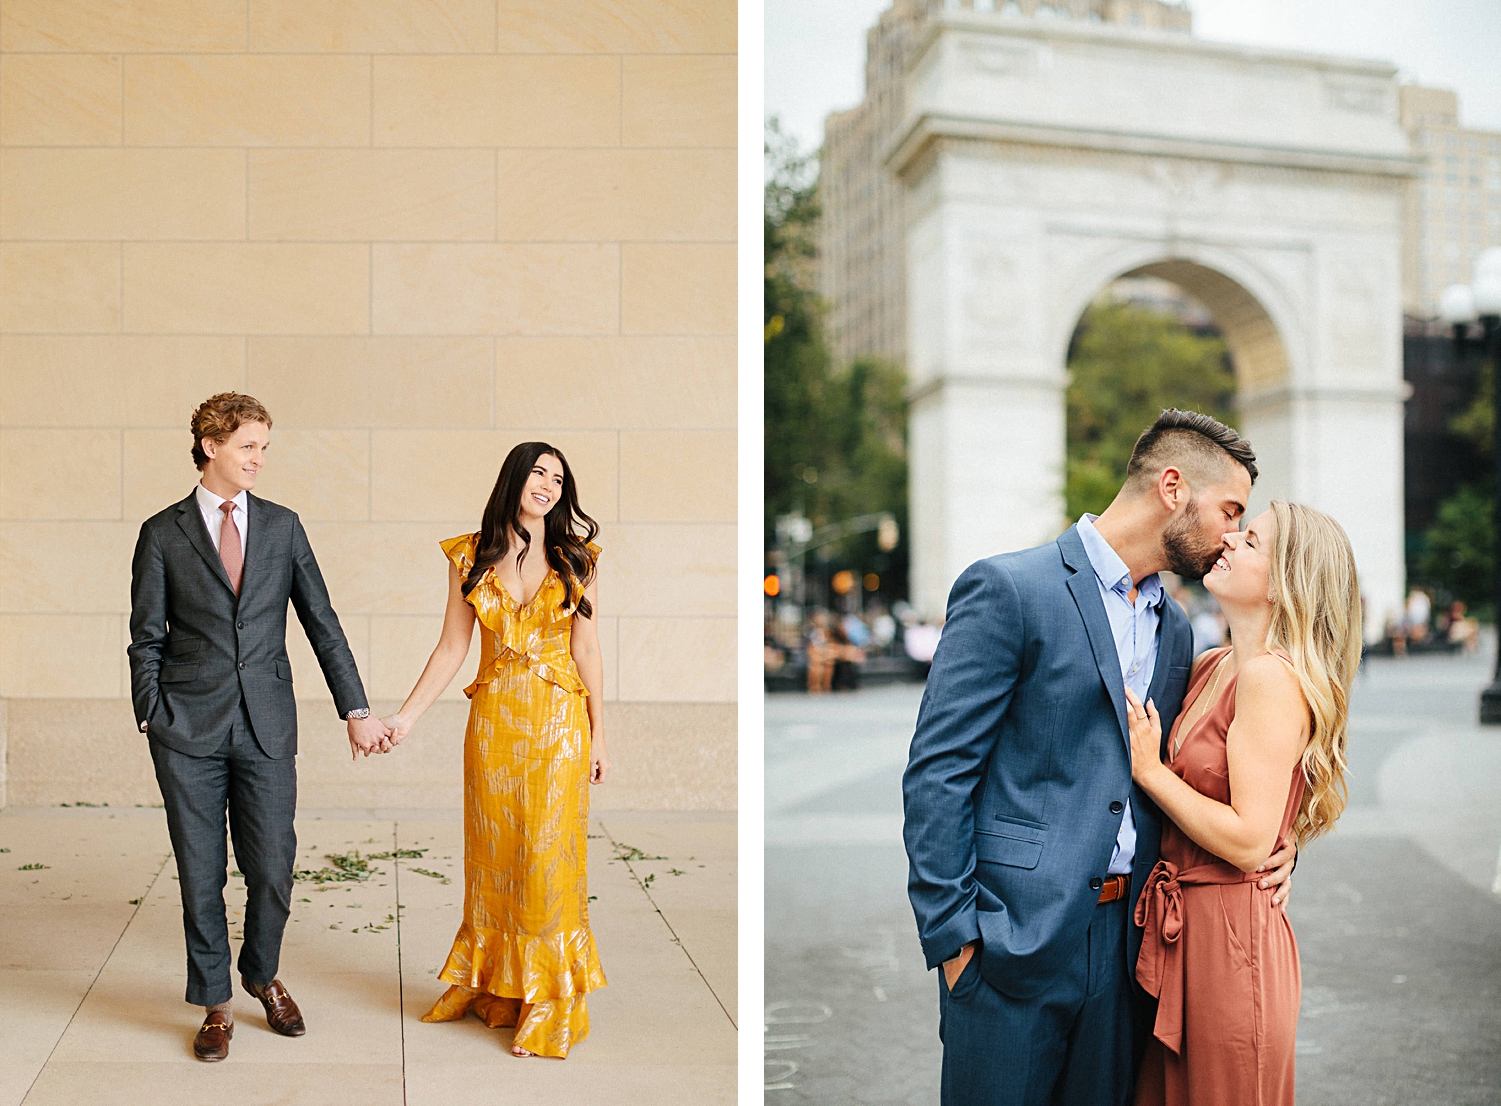 woman in yellow dress sitting with man in grey suit walking laughing best wedding venues NYC